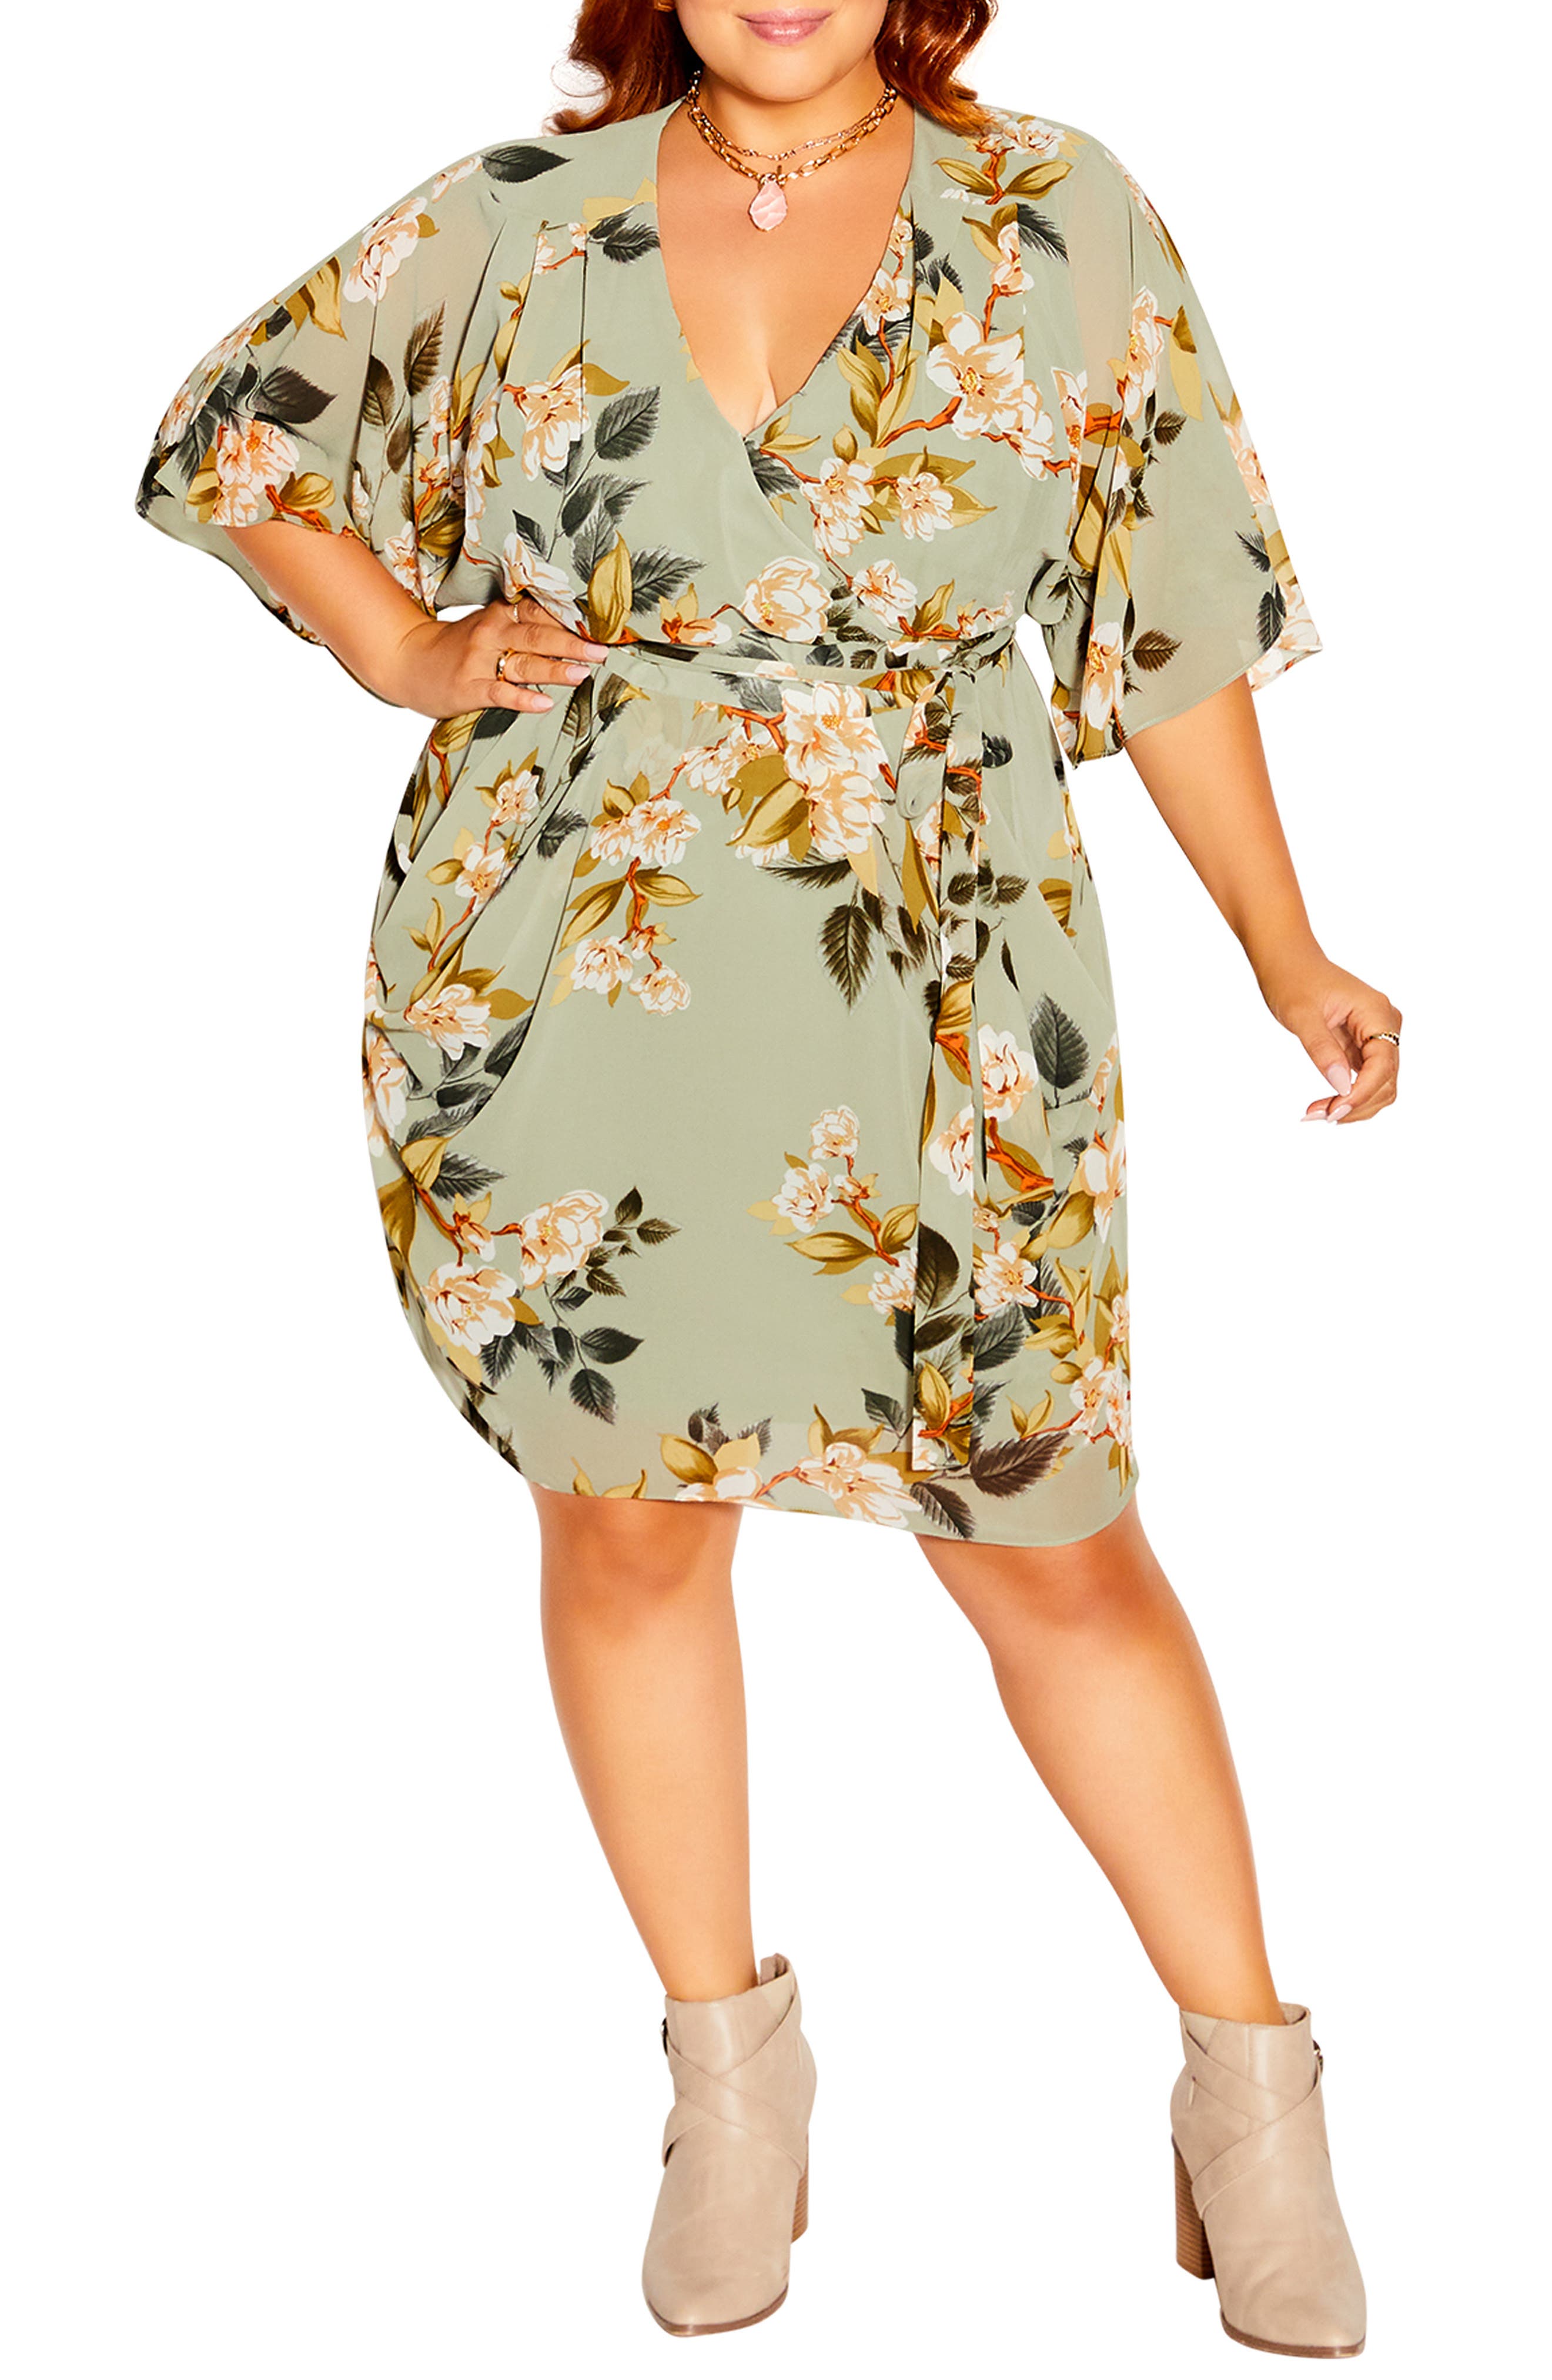 City Chic Plus Size Clothing For Women ...